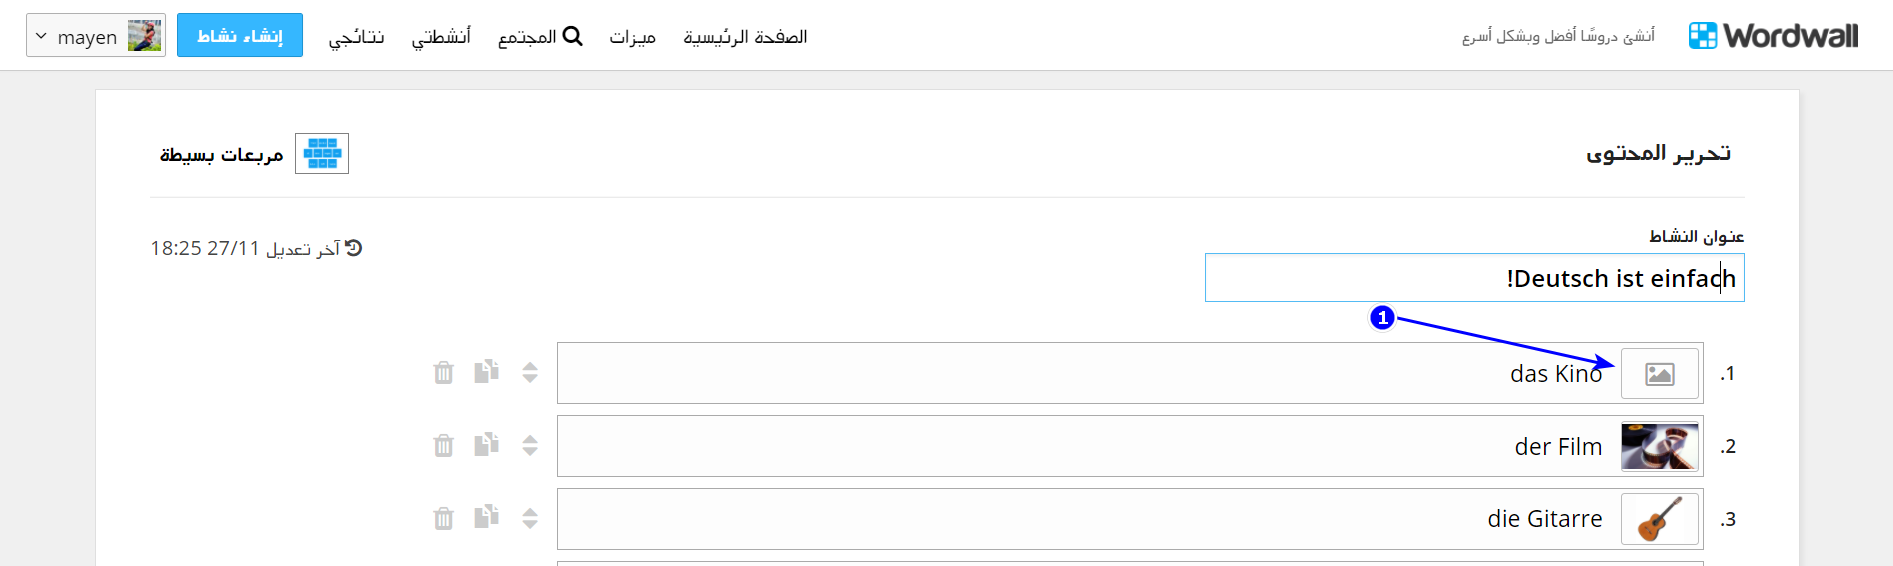 How_to_add_an_image_-_Arabic_1.png